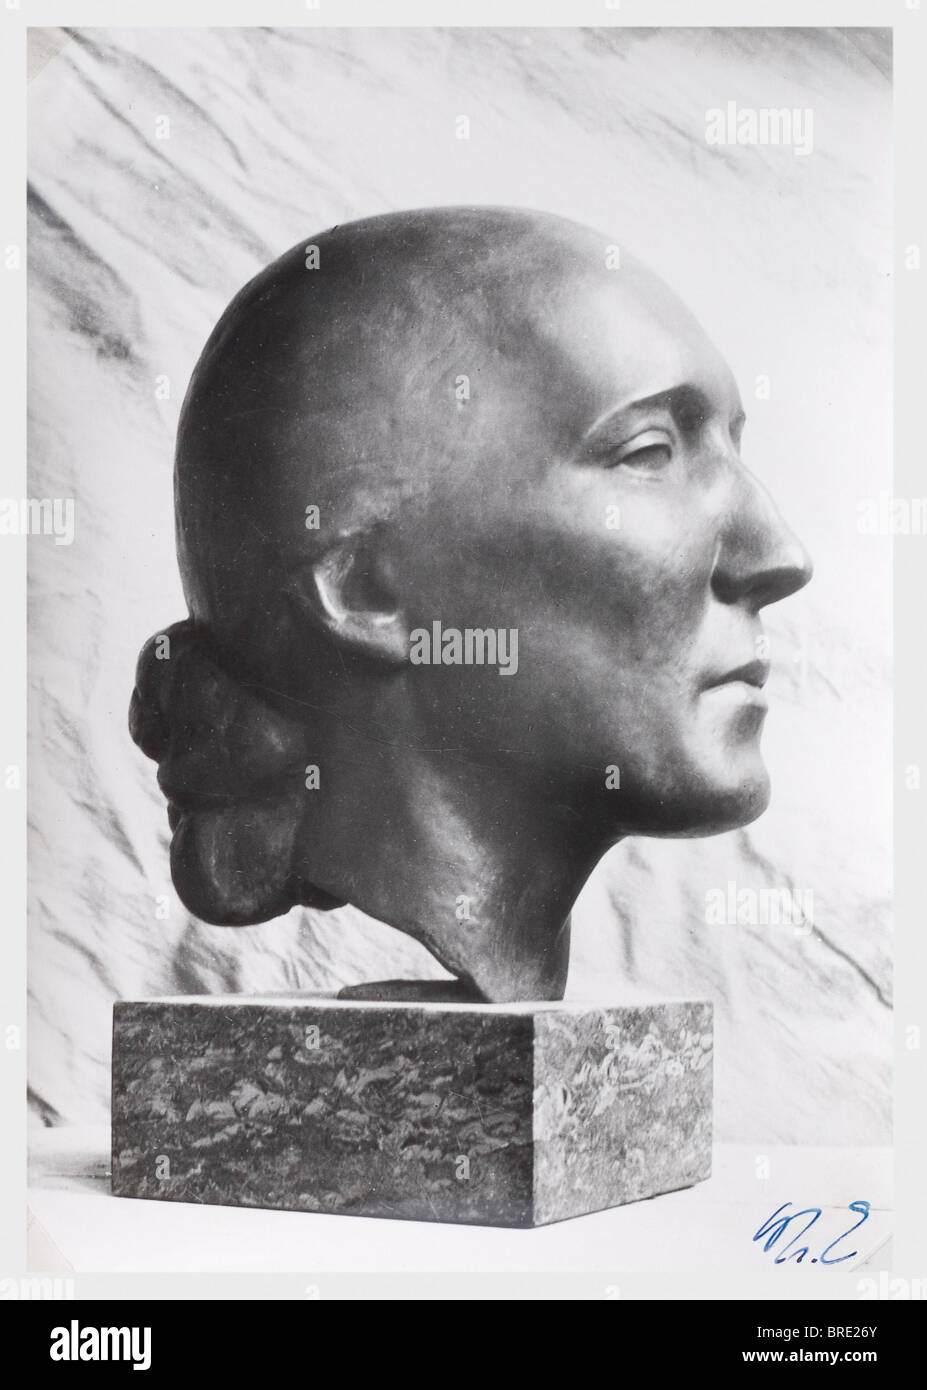 Professor Kurt Schmid-Ehmen (1901 - 1968), the portrait head 'Frau Helmerich' Life-size female bronze head on grey granite base. Signed on the left side of the neck 'Schmid-Ehmen W 1933', the base marked with the foundry name 'Preissmann Bauer & Co. München'. With a half portrait photo of the head bearing the artist's ink paraph. Height 29 cm, base 7 cm. The work was originally titled 'Frau Helmerich', in an exhibition held in 1991 in commemoration of the artist's 100th birthday, however, it was presented as 'Mita'. Also included is a copy of a letter, Artist's Copyright has not to be cleared Stock Photo